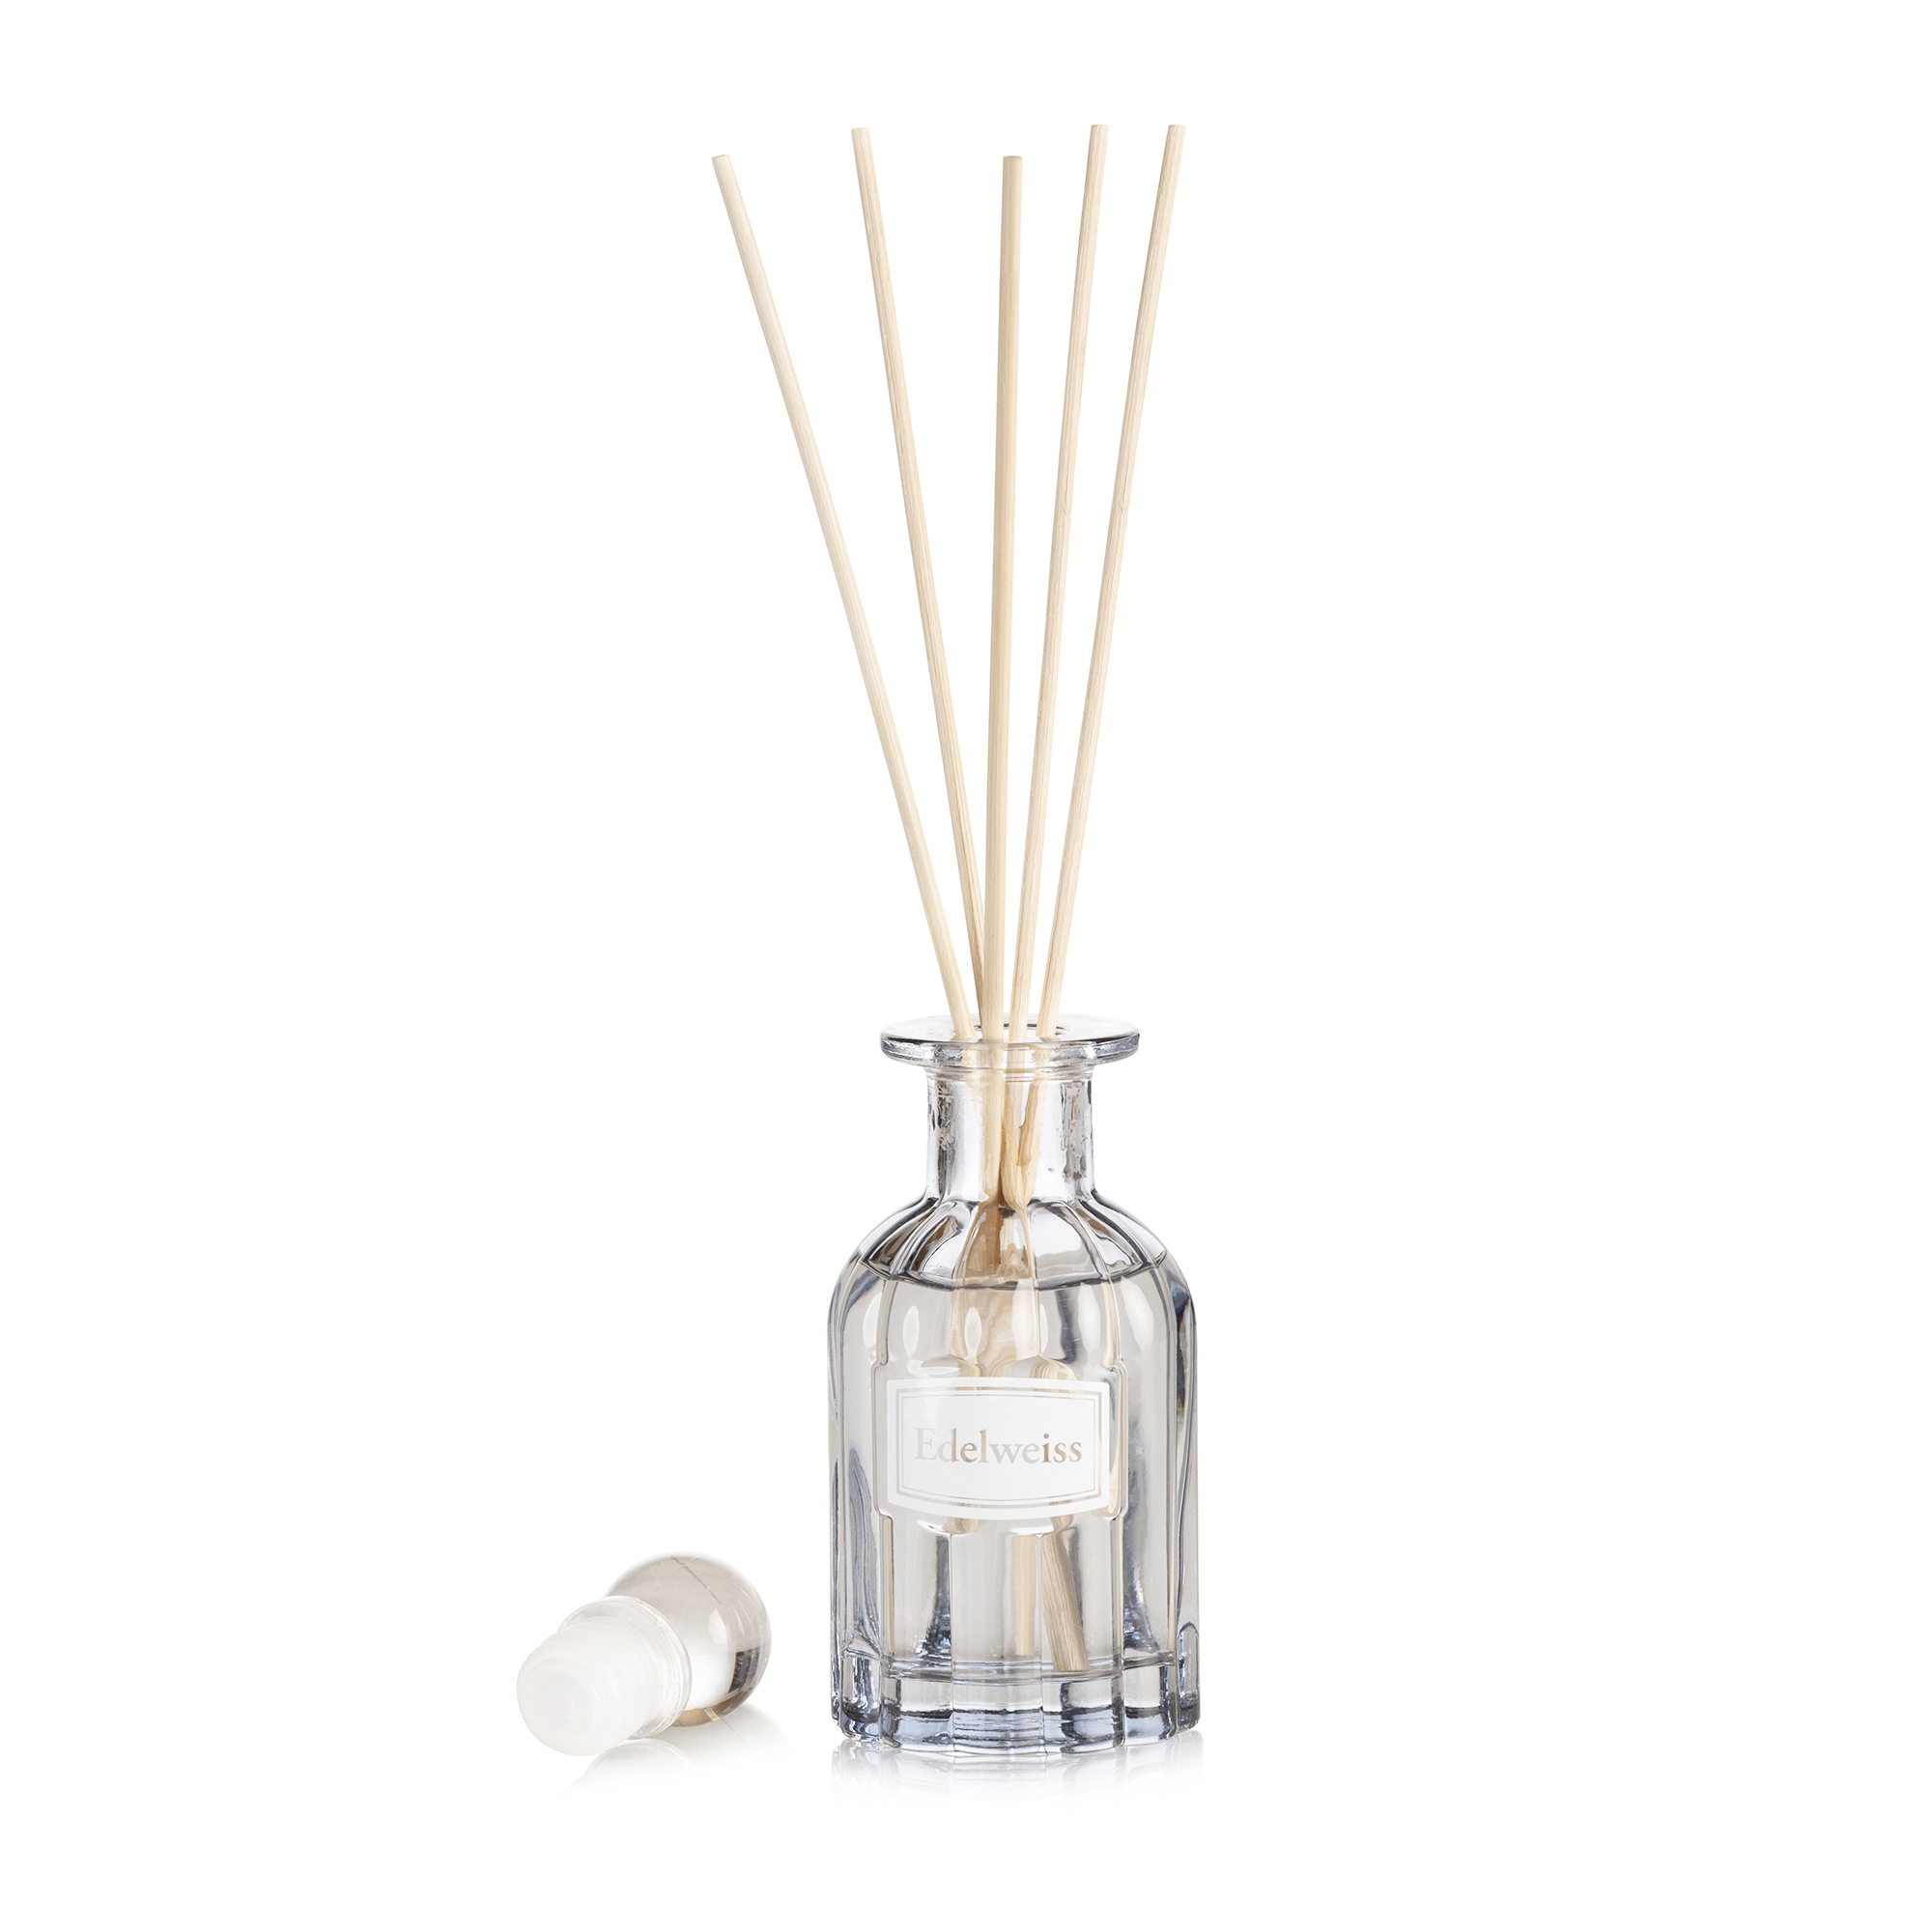 Diffuser Edelweiss 100 ml Esprit Provence